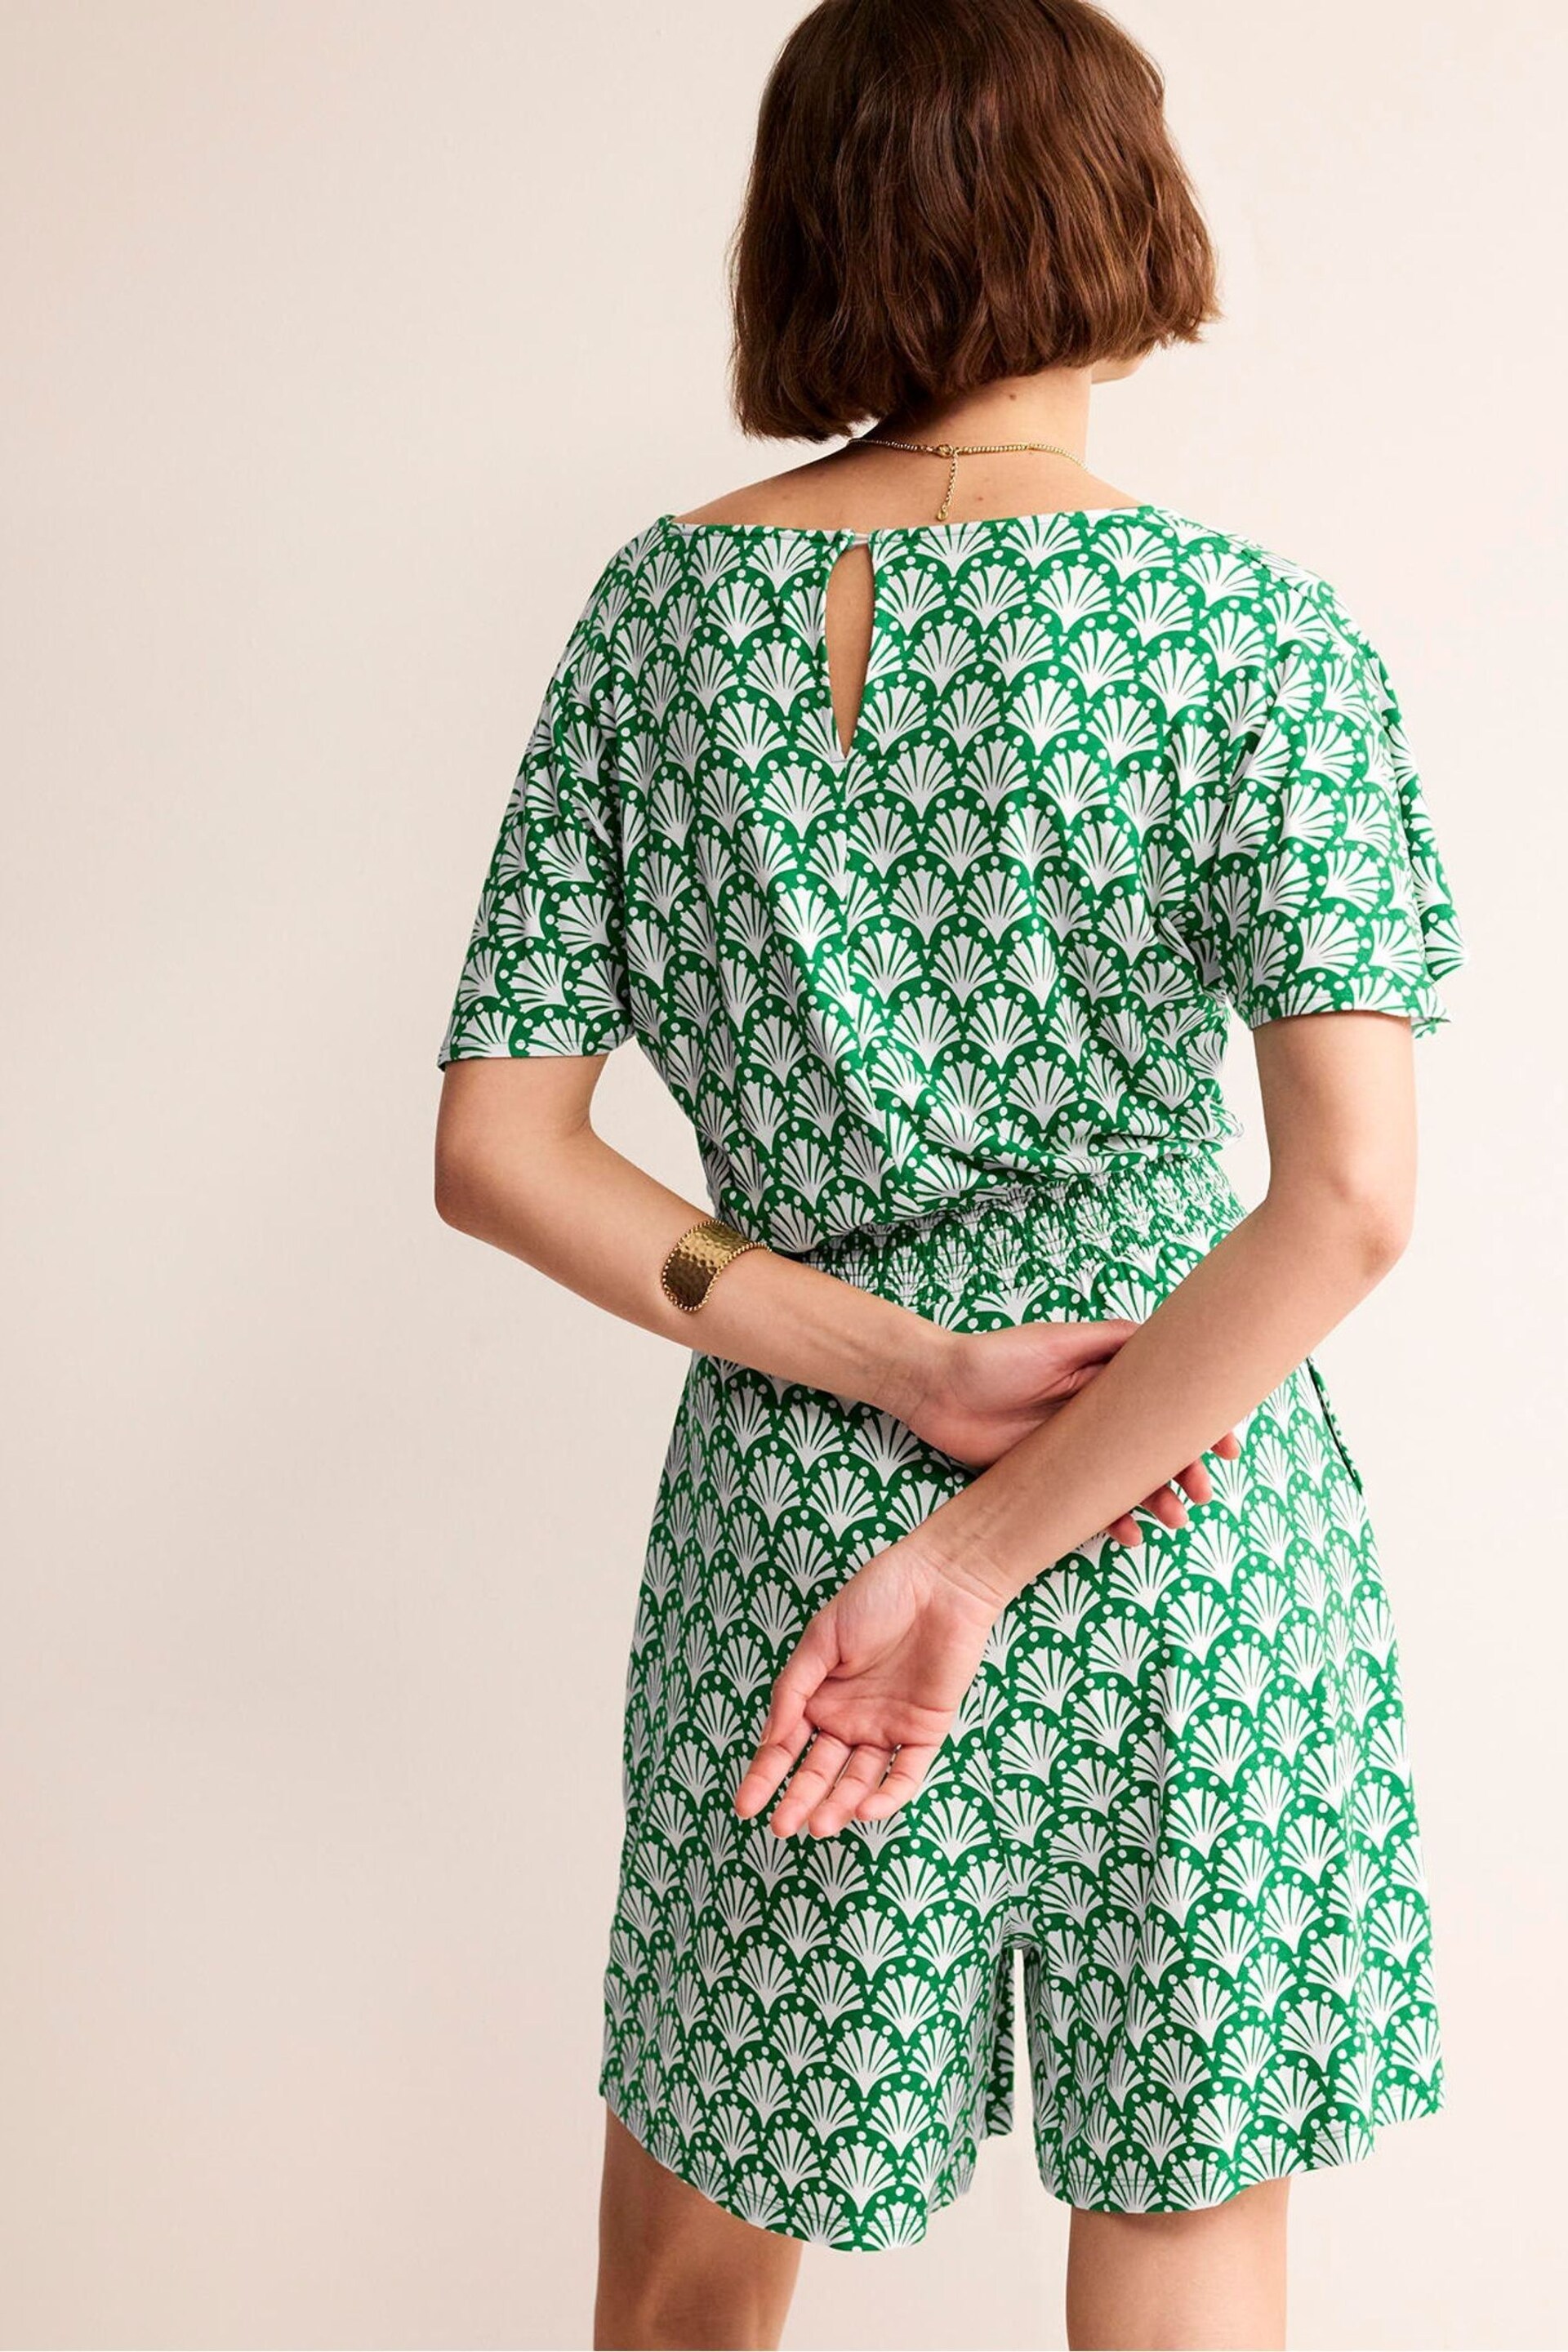 Boden Green Smocked Jersey Playsuit - Image 2 of 5